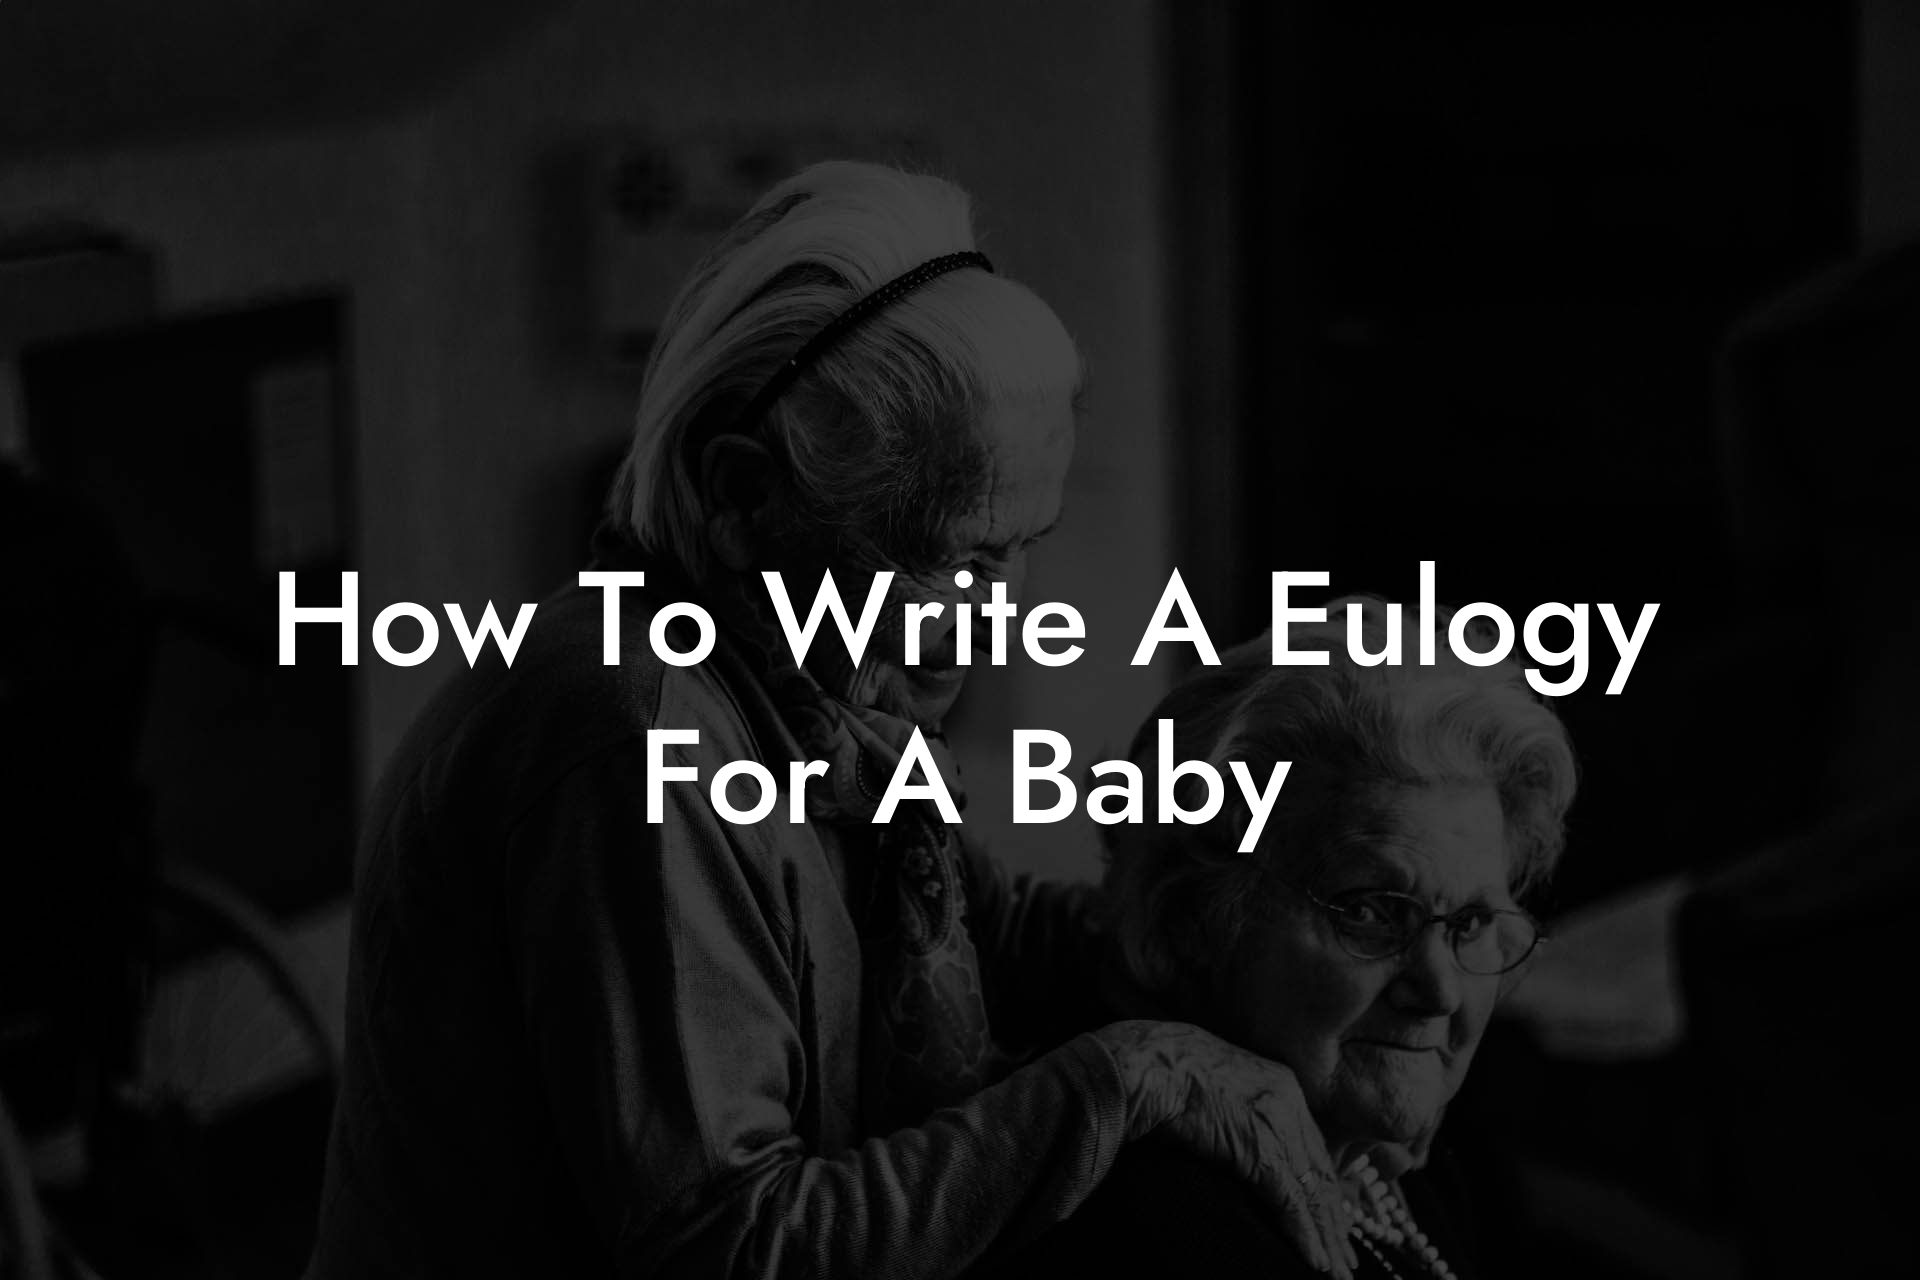 How To Write A Eulogy For A Baby